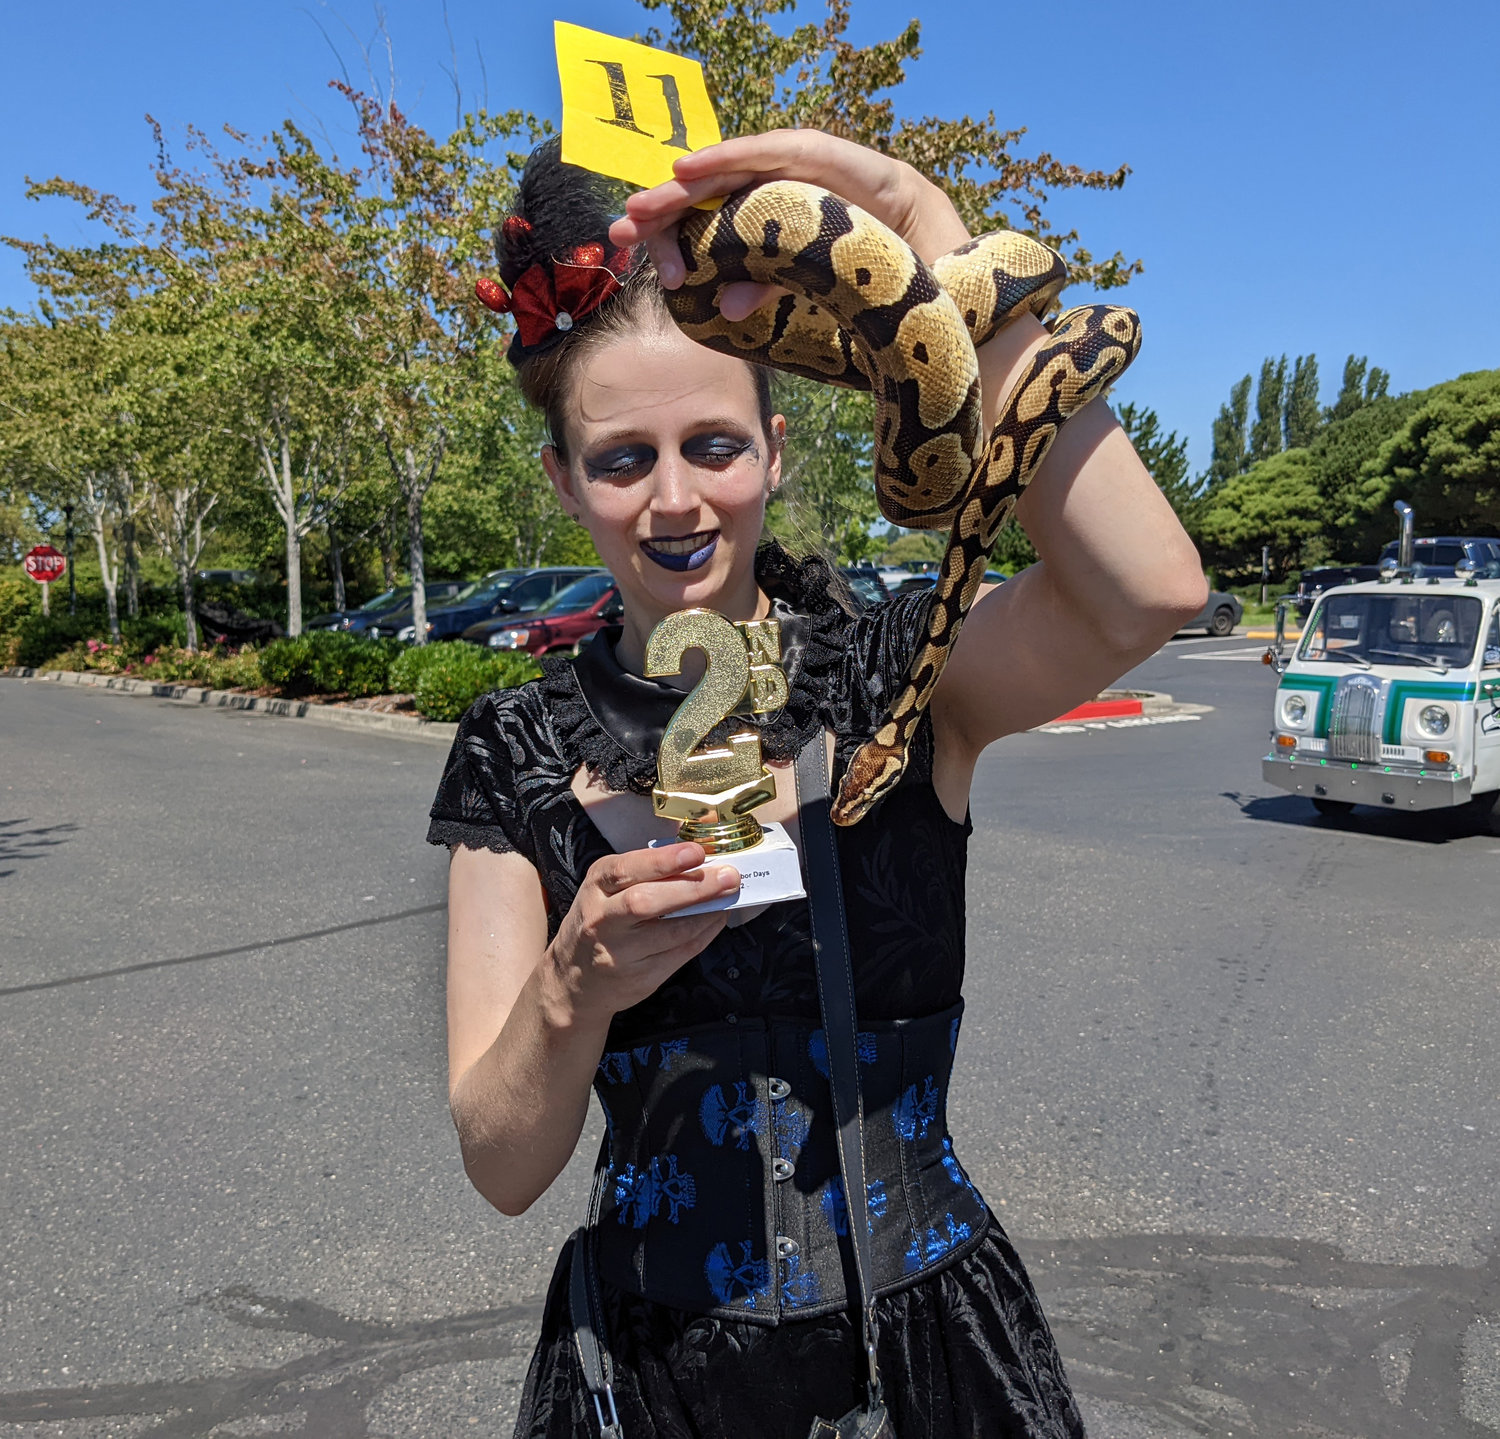 Grip, a ball python, won second place in the pet contest.